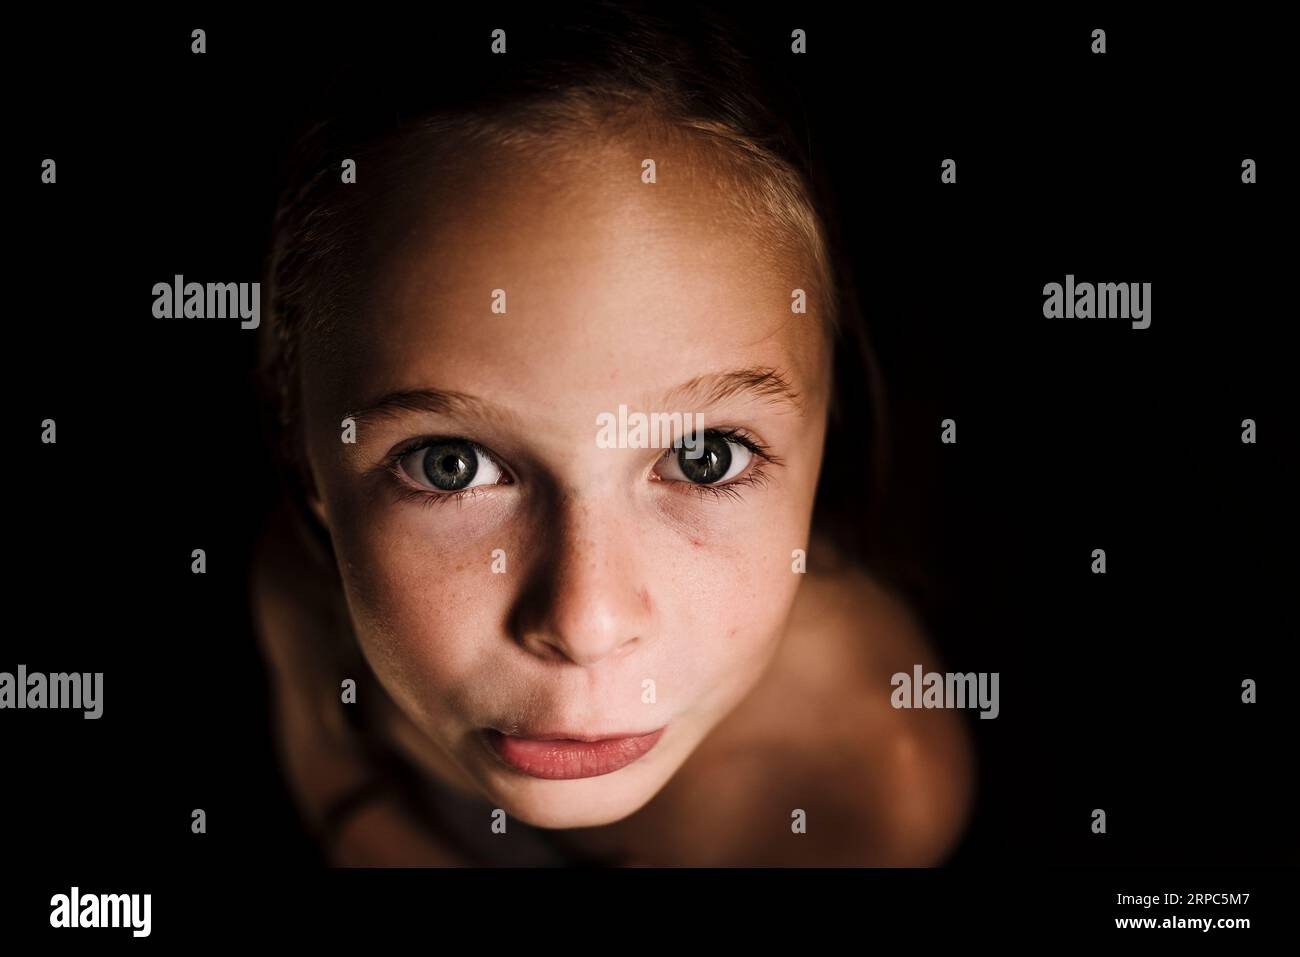 Portrait of little girl with wet hair in low light and dark background Stock Photo